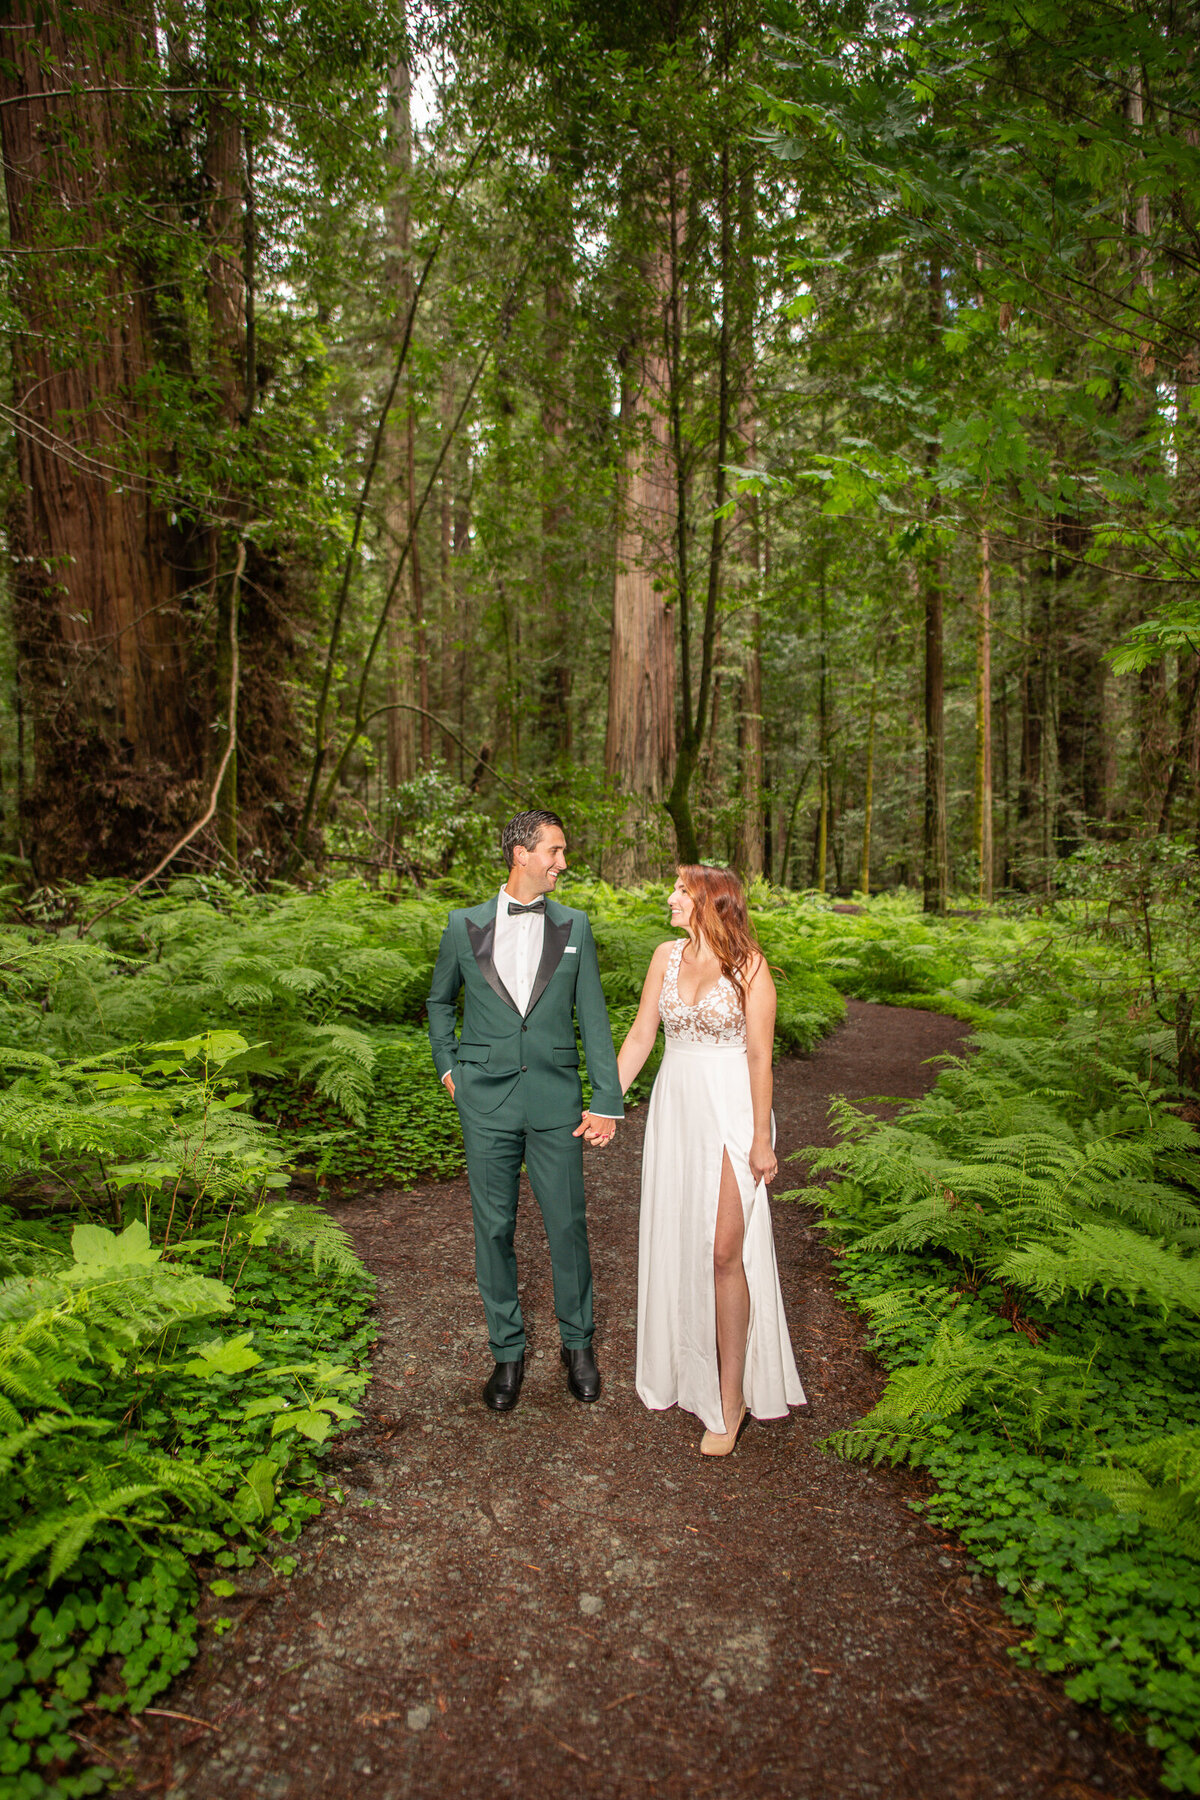 Avenue-of-the-Giants-Redwood-Forest-Elopement-Humboldt-County-Elopement-Photographer-Parky's Pics-8